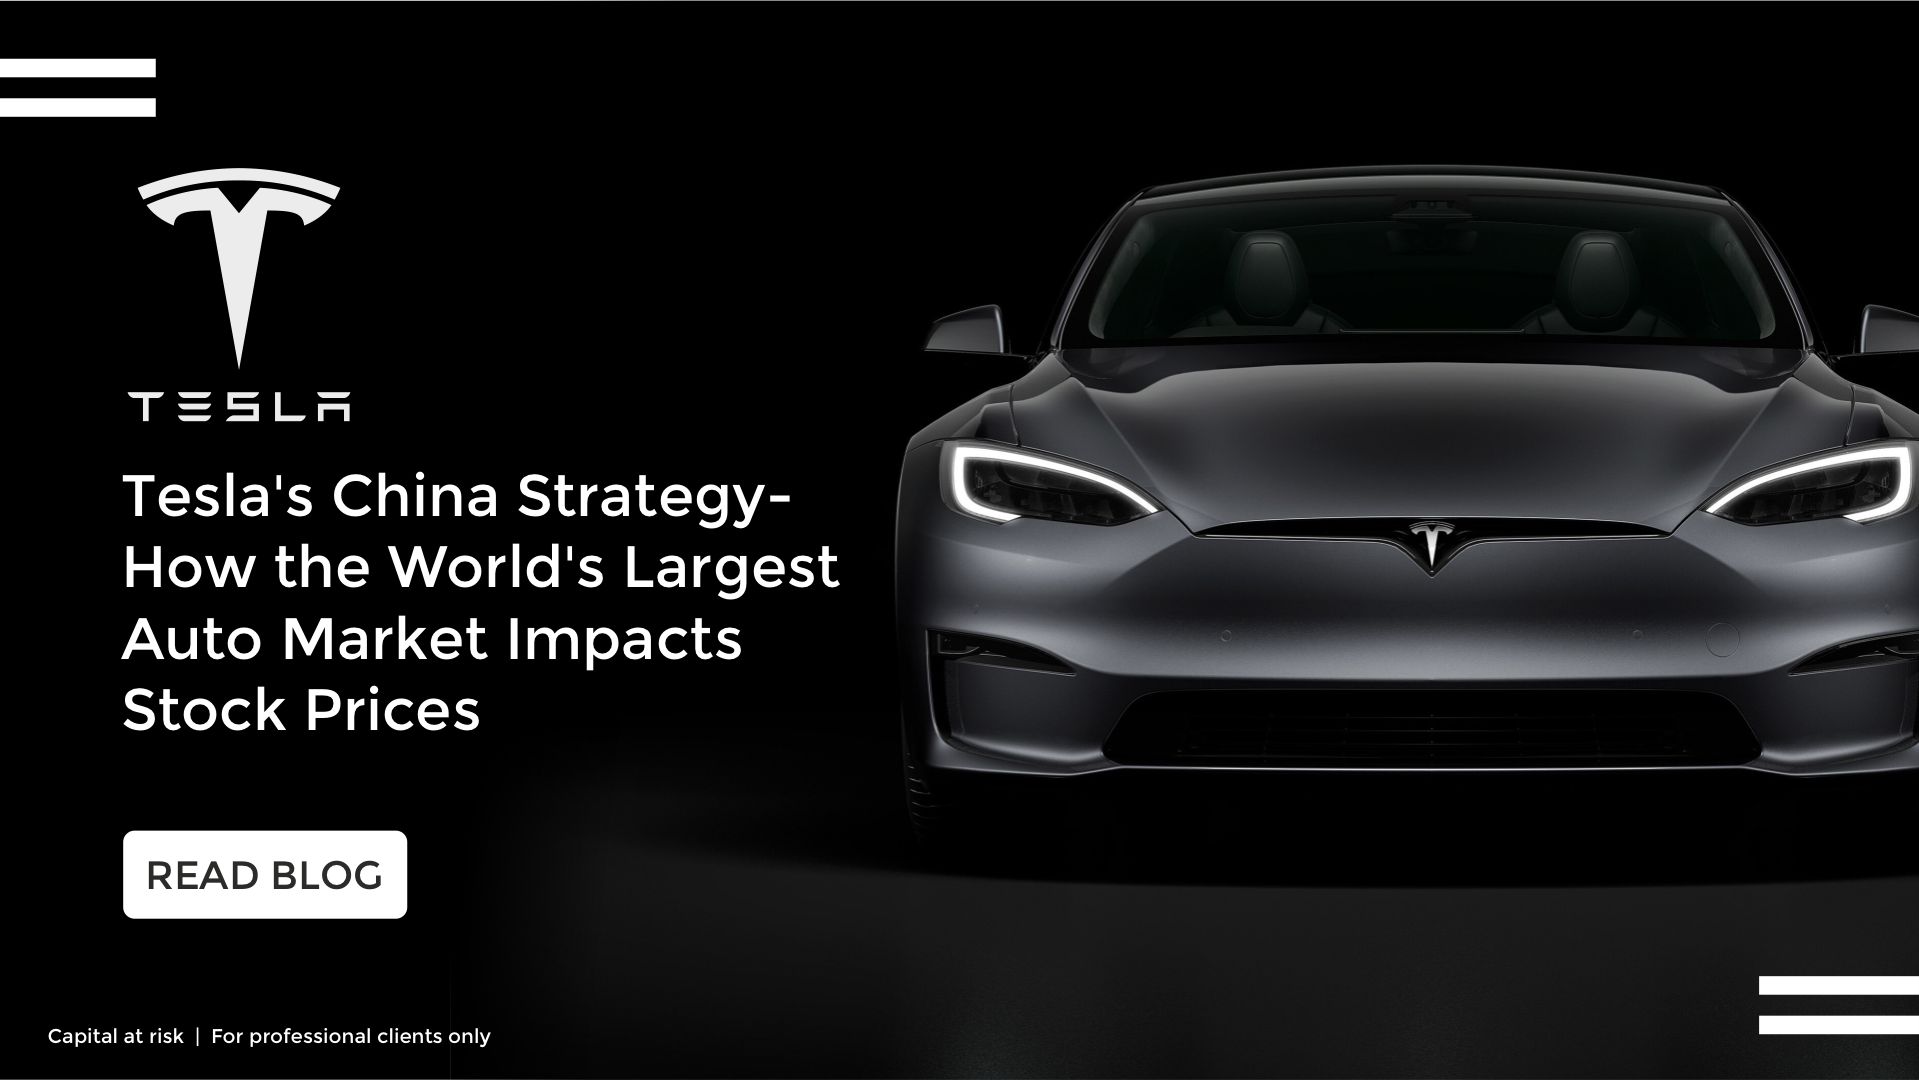 Tesla's China Strategy Impacts Stock Prices